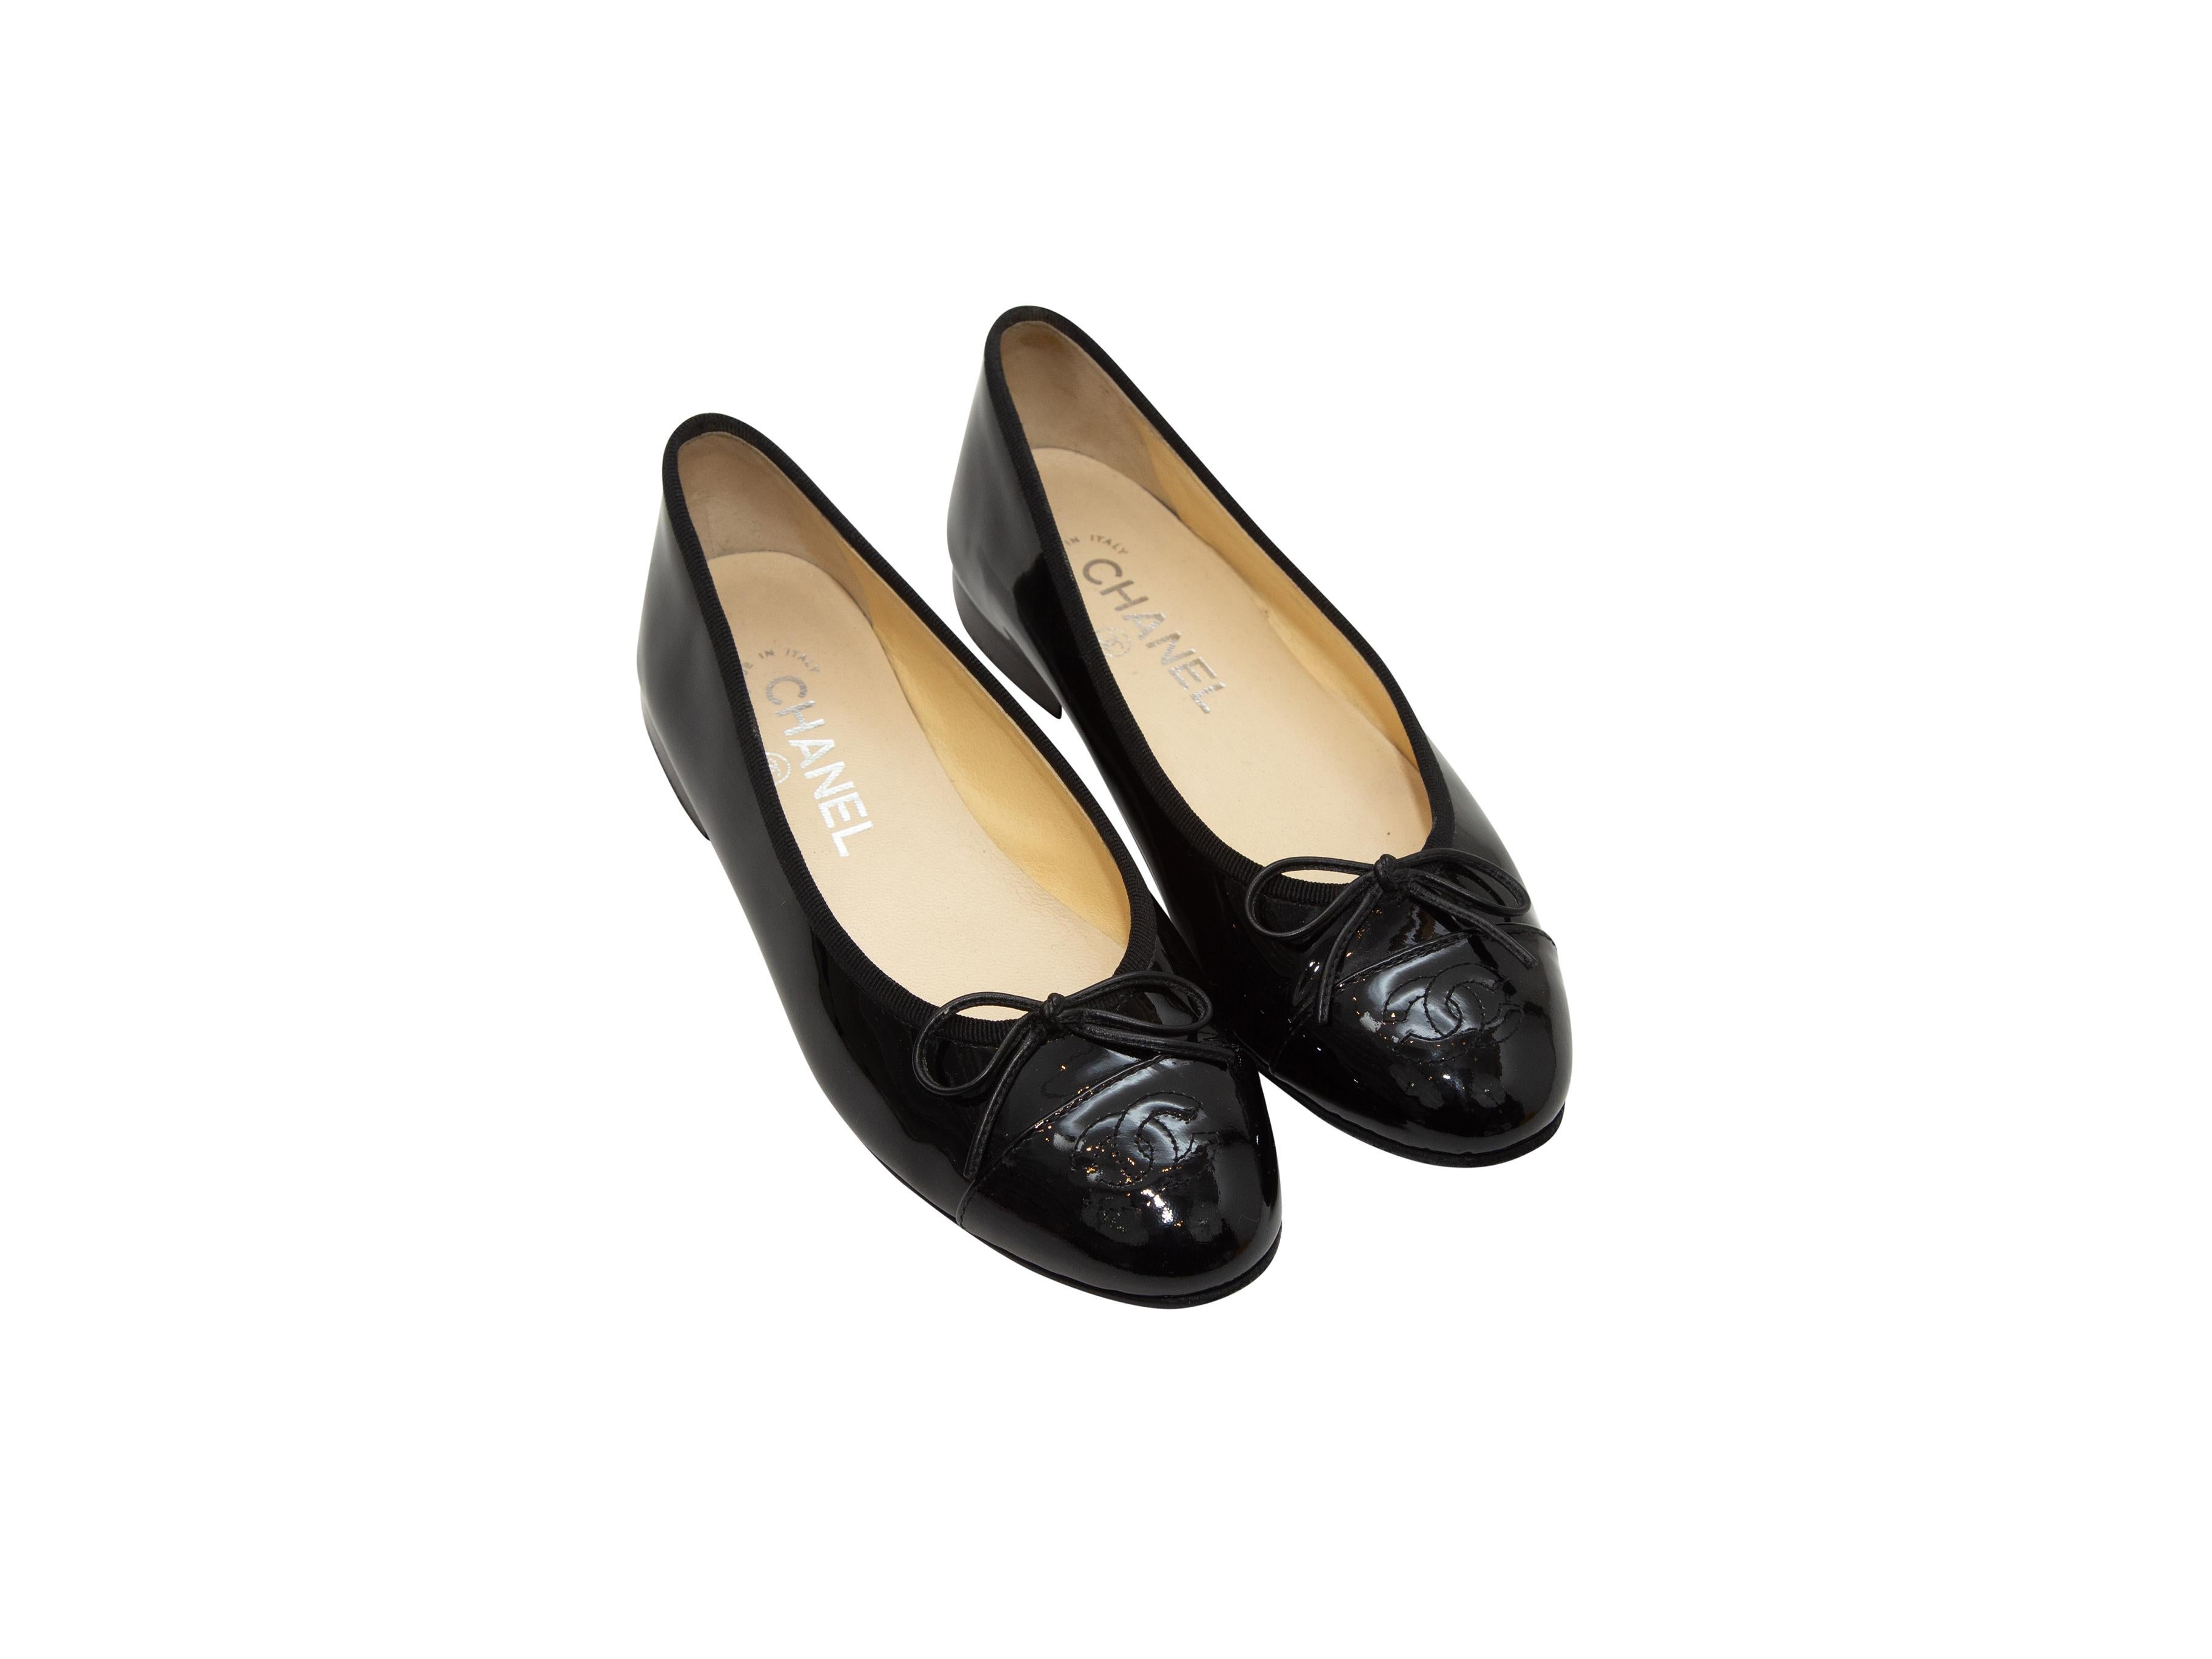 Product details: Black patent leather cap-toe ballet flats by Chanel. CC stitching and bow accents at toes. Stacked heels. Designer size 36. 0.5